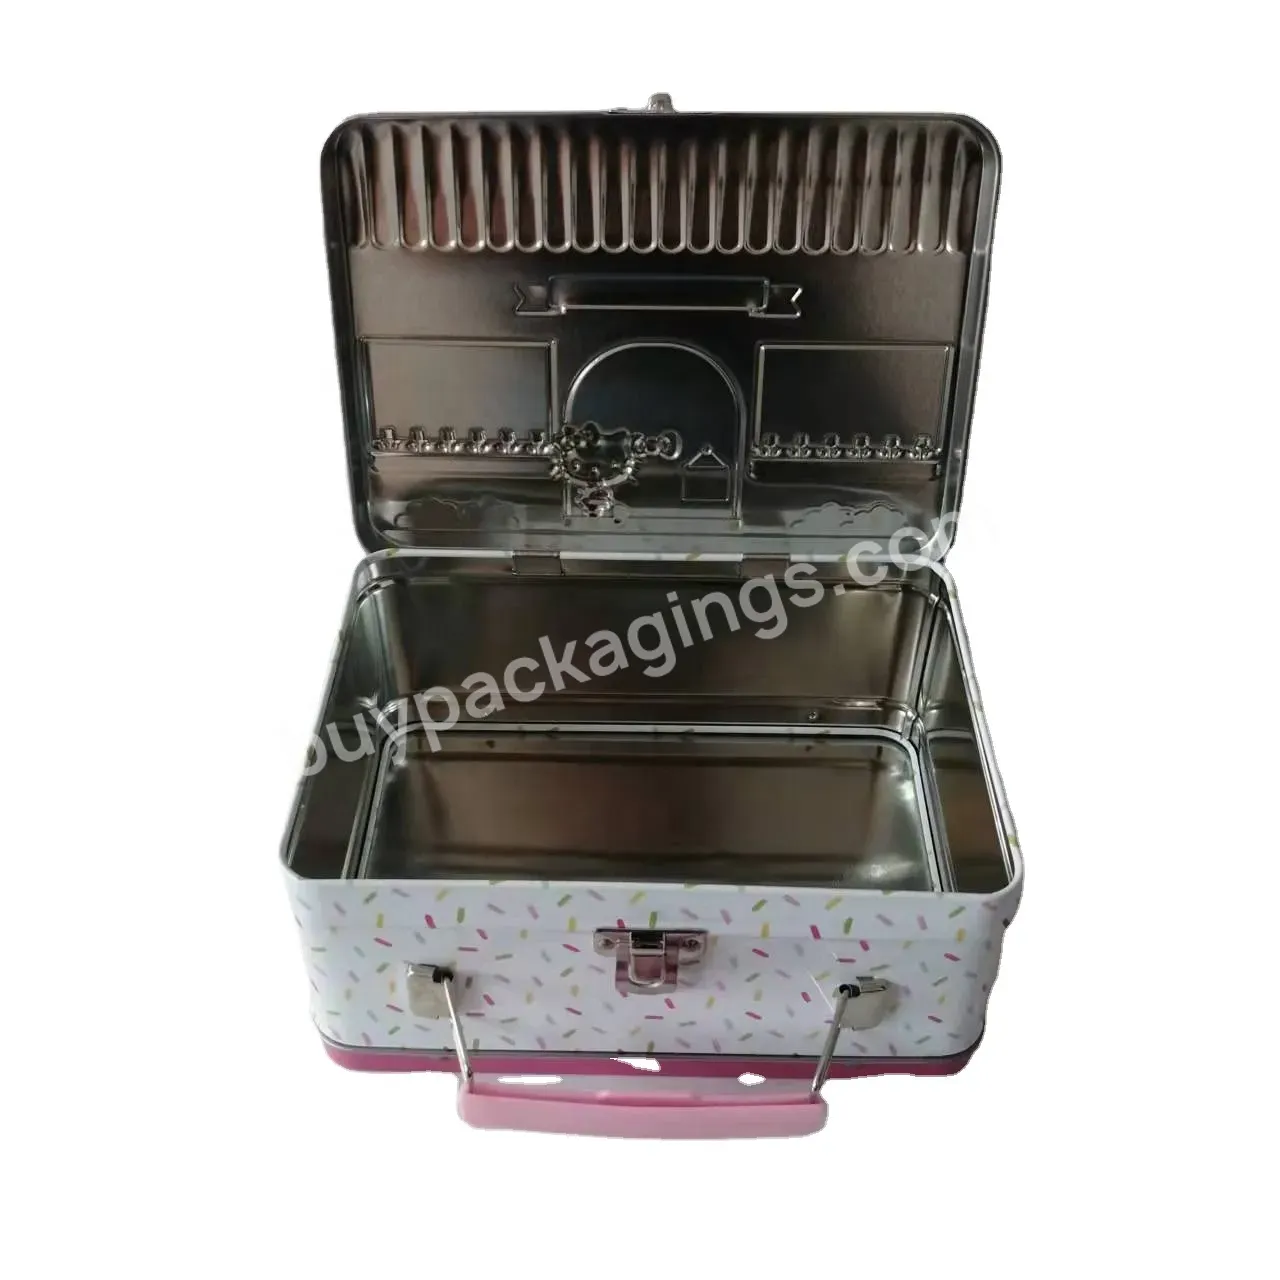 Food Safe Factory Direct School Travel Metal Lunch Box With Handle And Clasp Travel Lunch Handle Tin Box 180x130x70 - Buy Tin Lunch Box,Kids Lunch Tin,School Lunch Box.